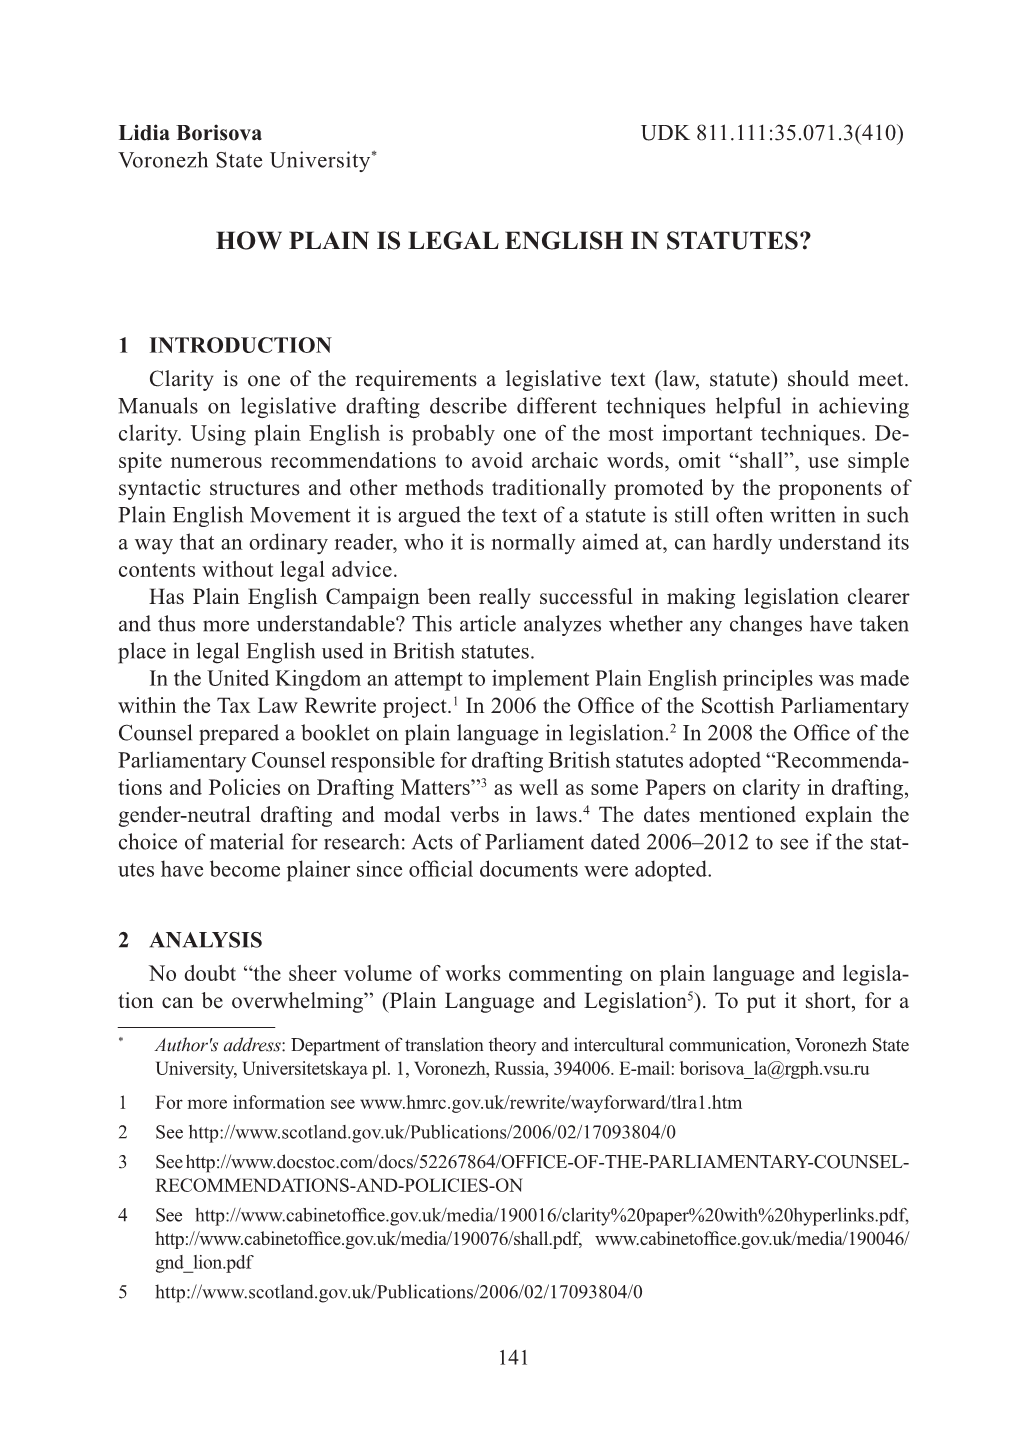 How Plain Is Legal English in Statutes?